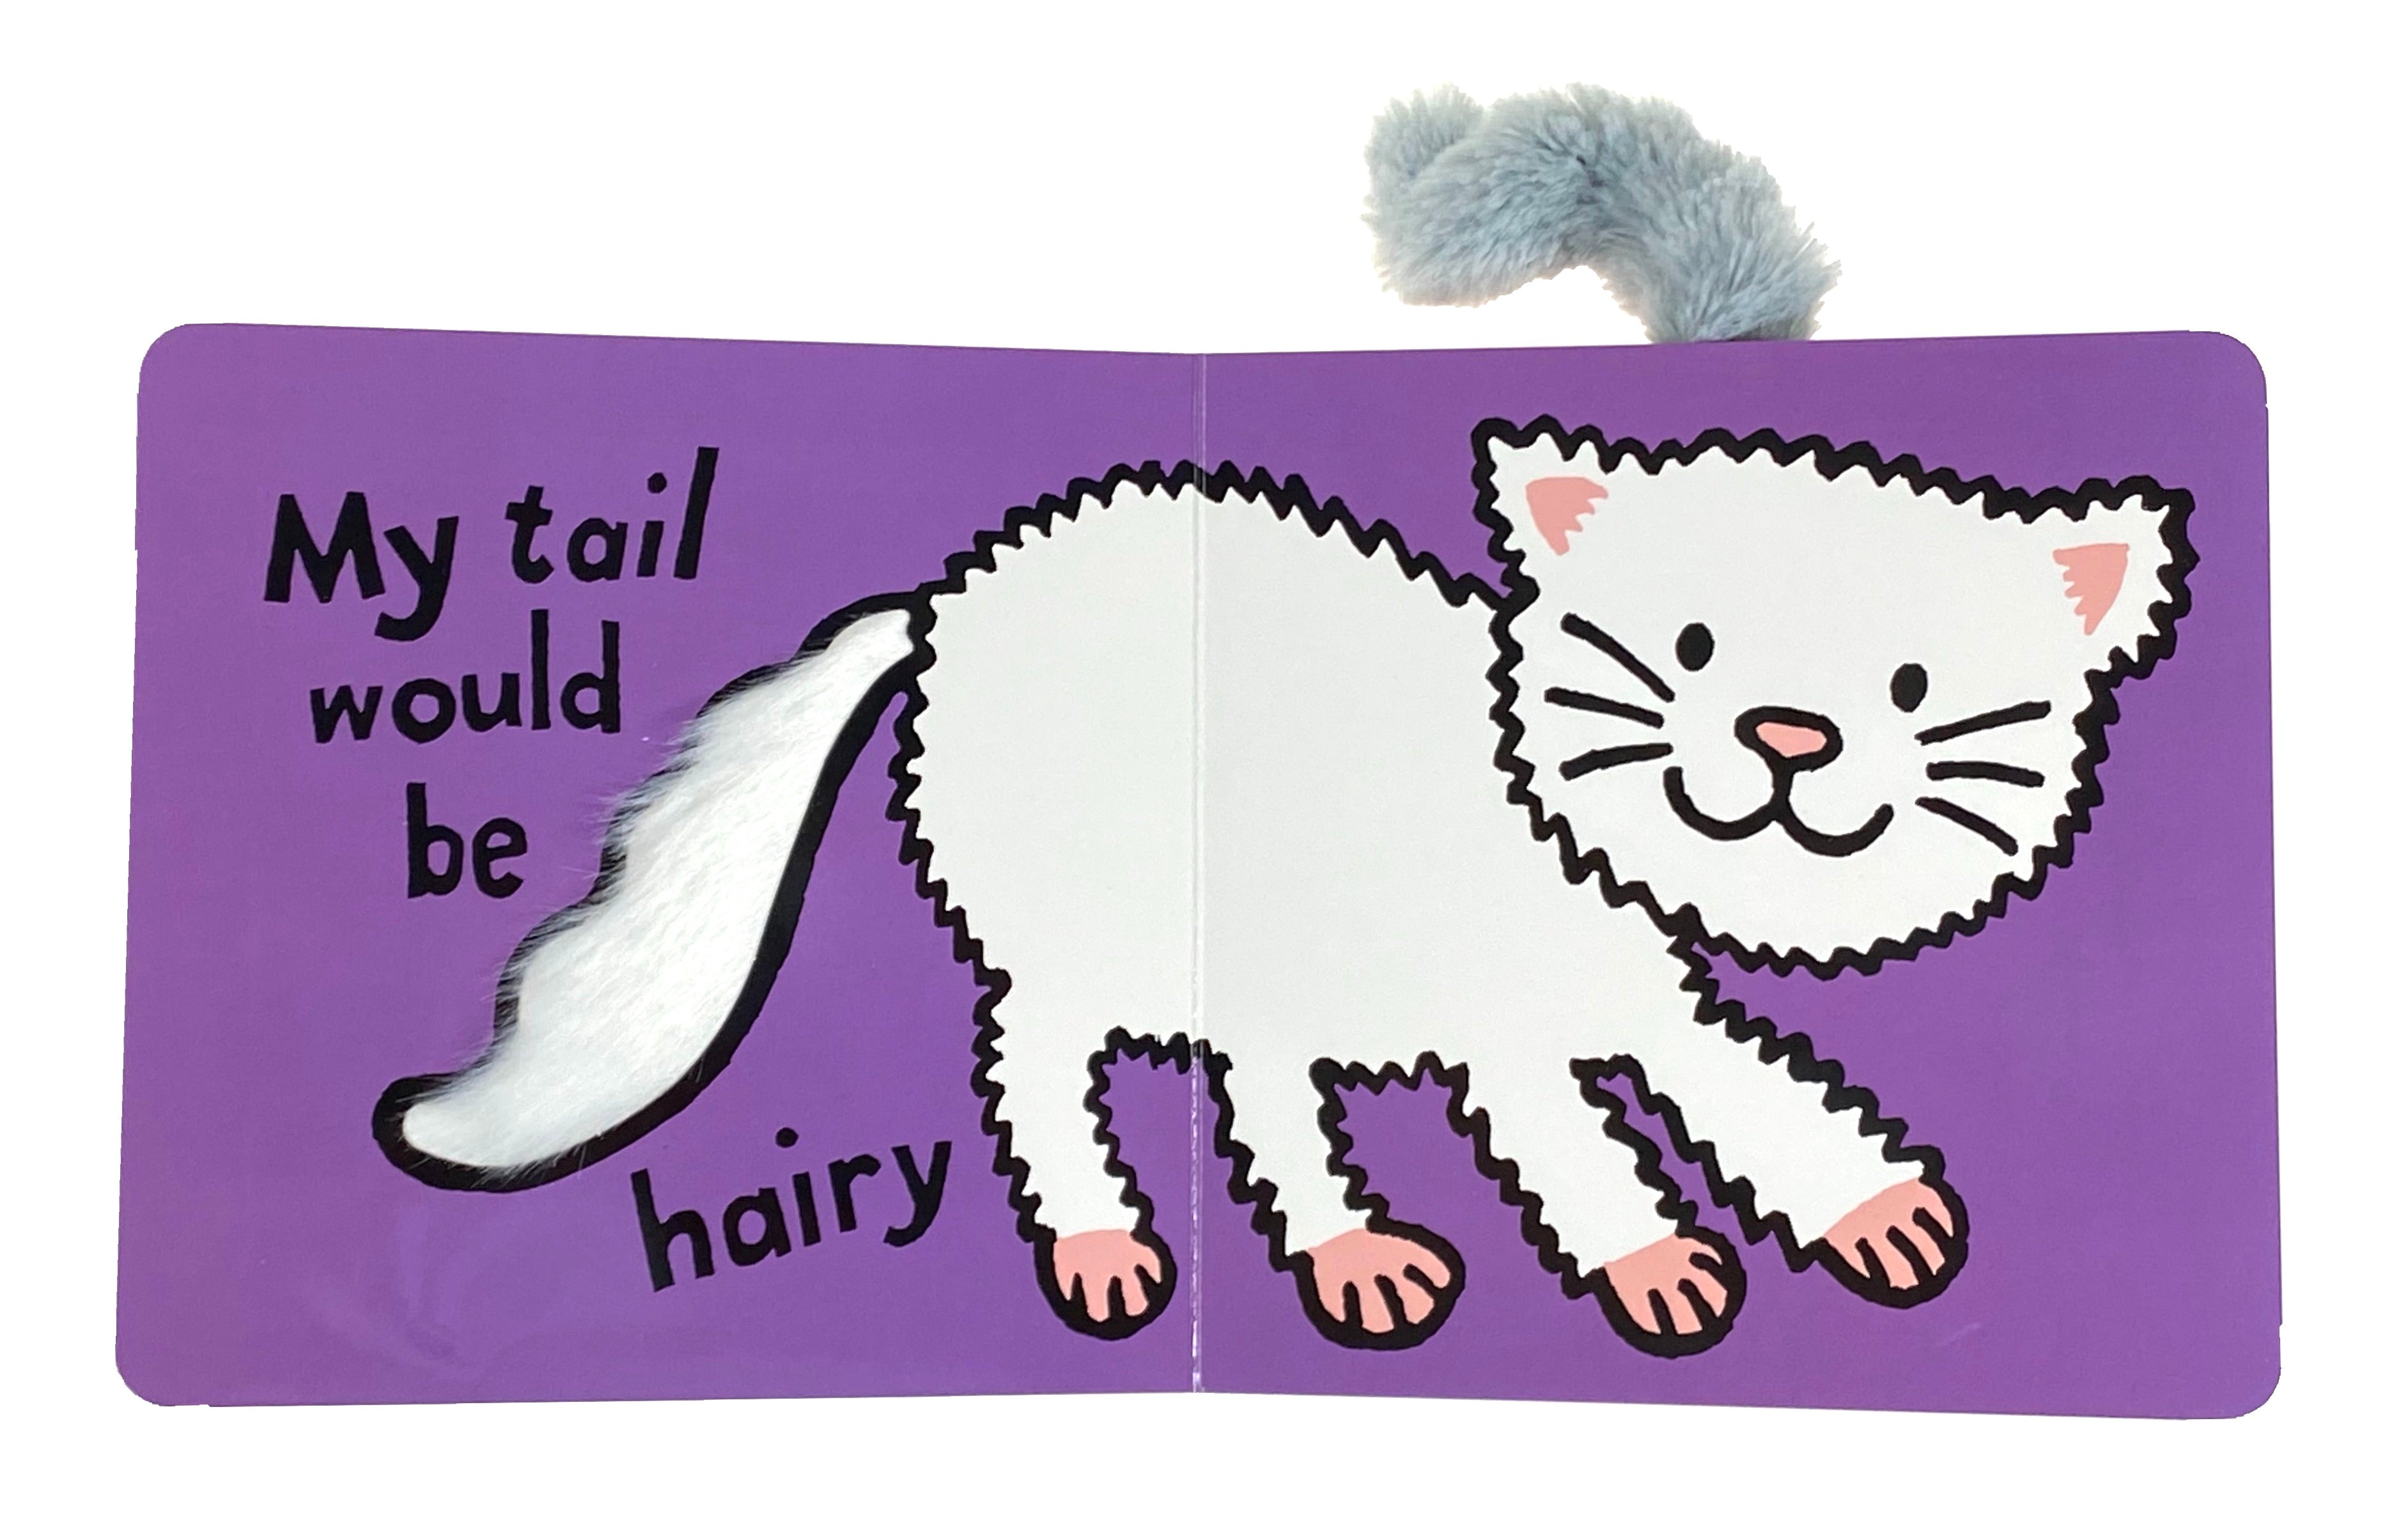 Jellycat Book - If I Were A Kitty    